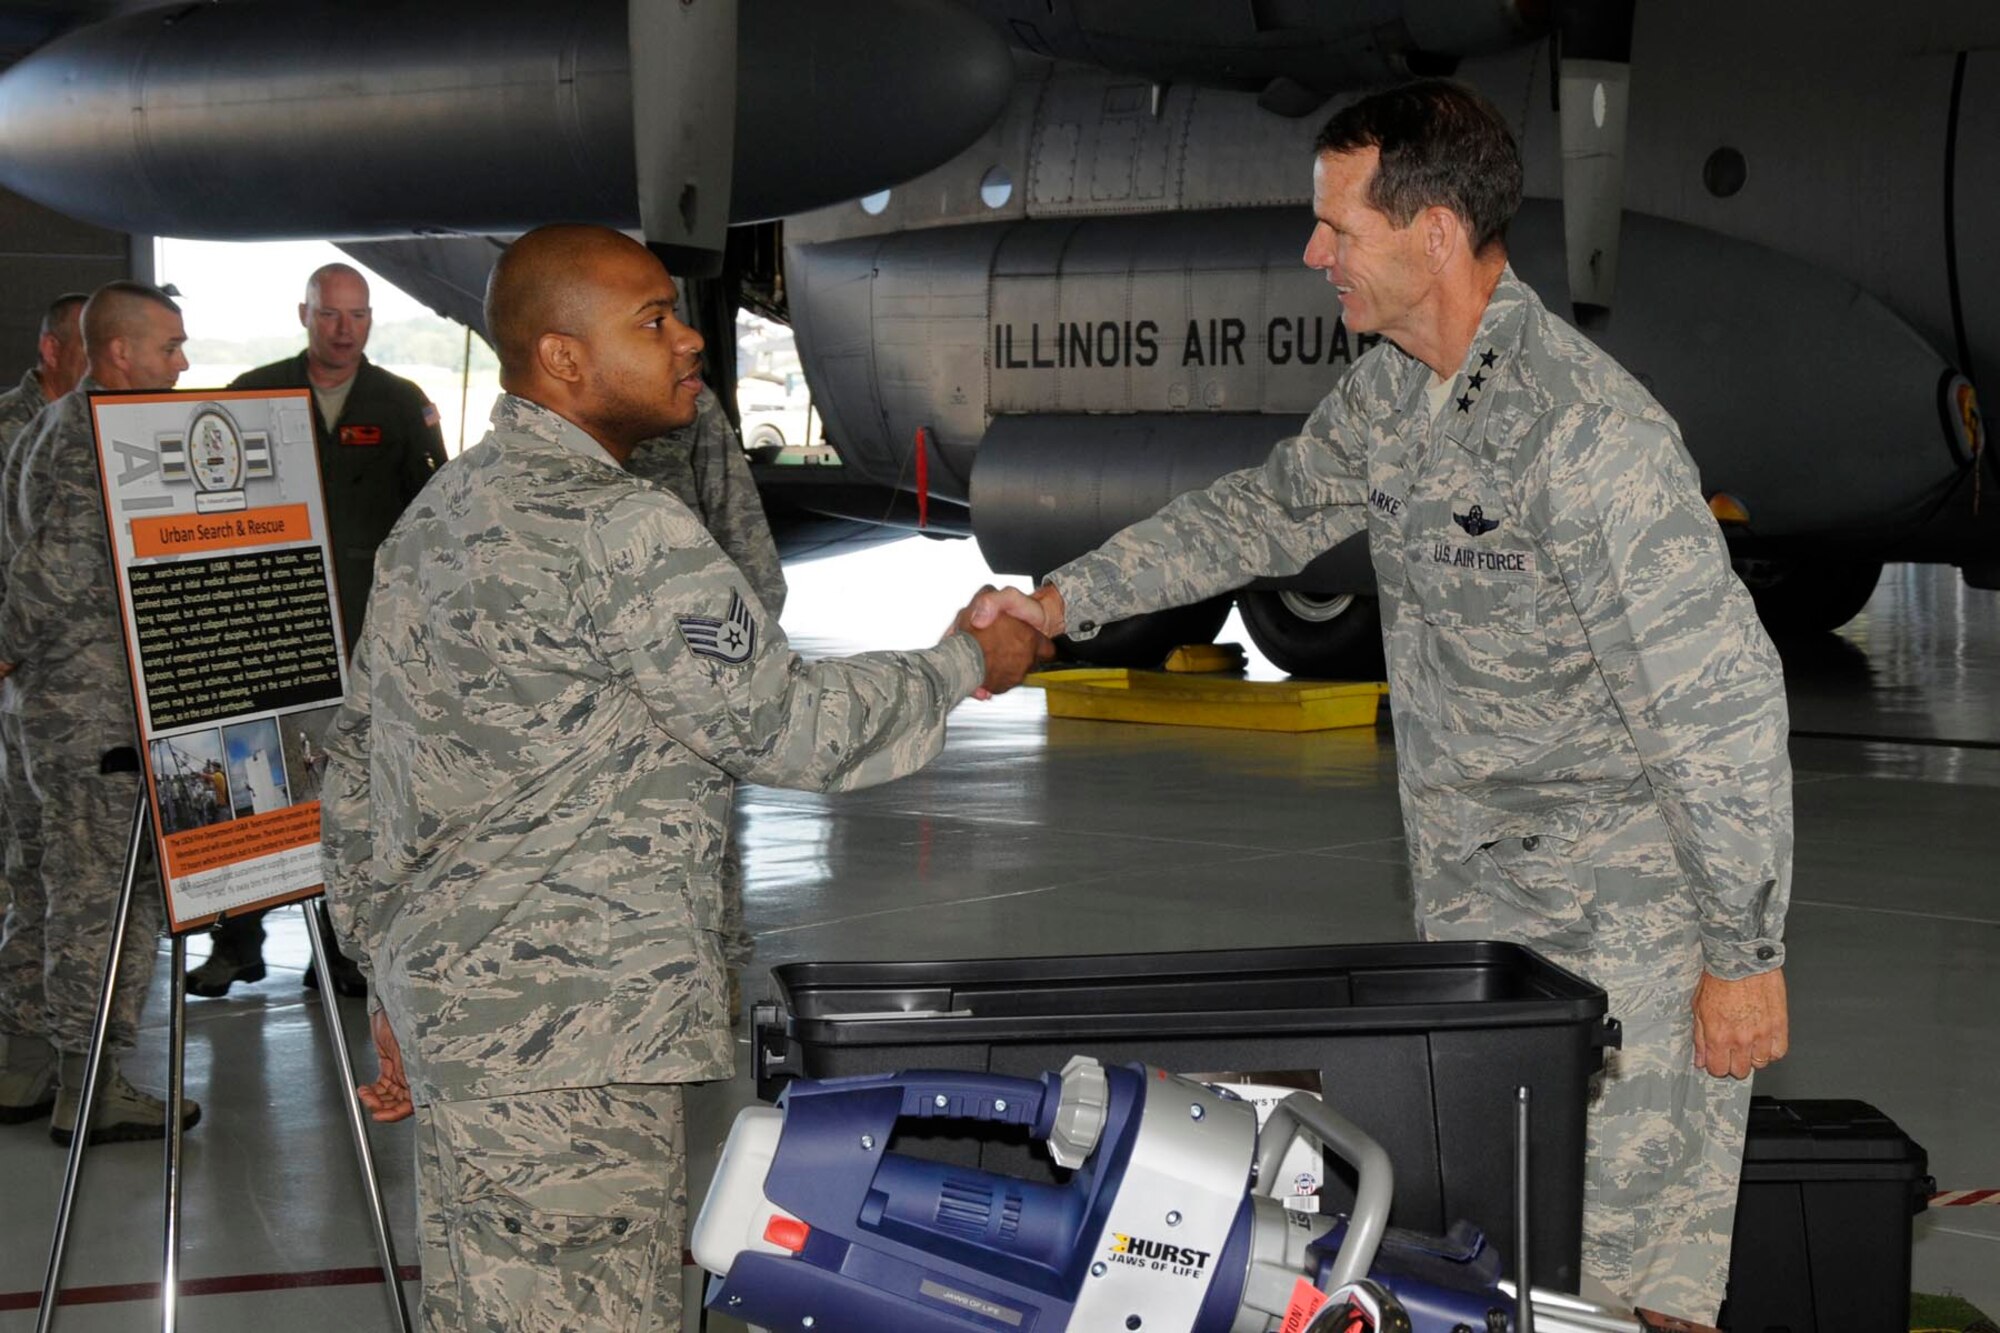 Lt. Gen. Stanley E. Clarke, Director of the Air National Guard, meets Staff Sgt. Brandon Johnson of the 182nd Civil Engineer Squadron to receive a briefing on Urban Search and Rescue equipment during a site visit at the182nd Airlift Wing in Peoria, Ill. Sep. 6, 2013.  (Air National Guard photo by Tech. Sgt. Todd Pendleton/released)